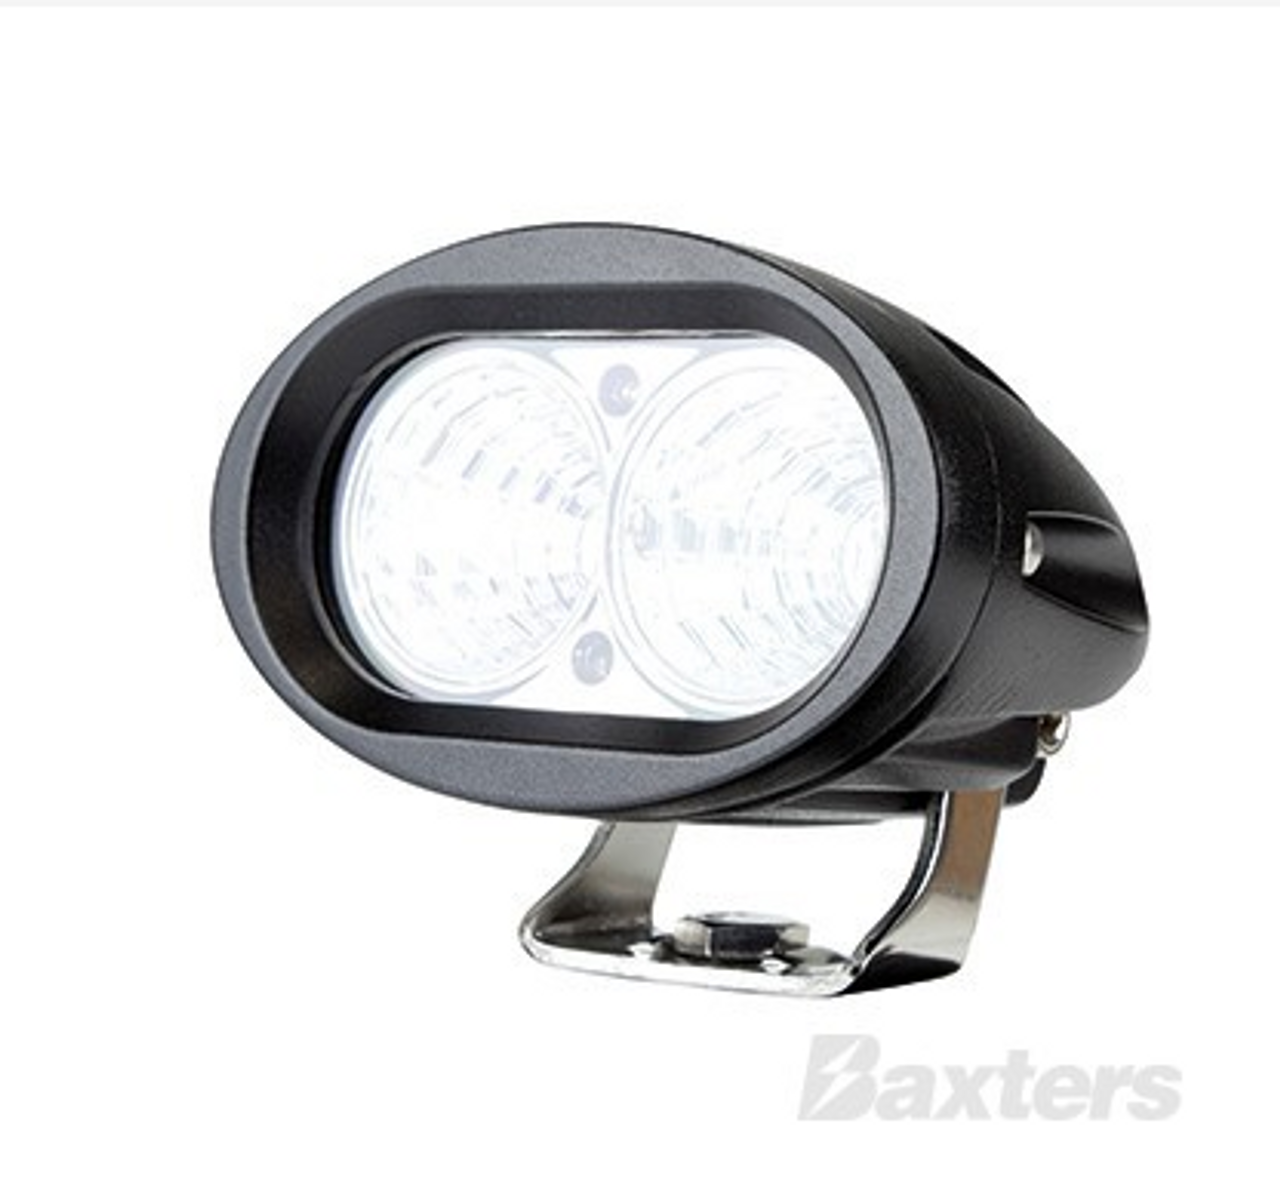 RWL9220F - LED Work Lamp. 10-30v 20W Round Flood Light. Water and Dust Proof. Simple Installation. 